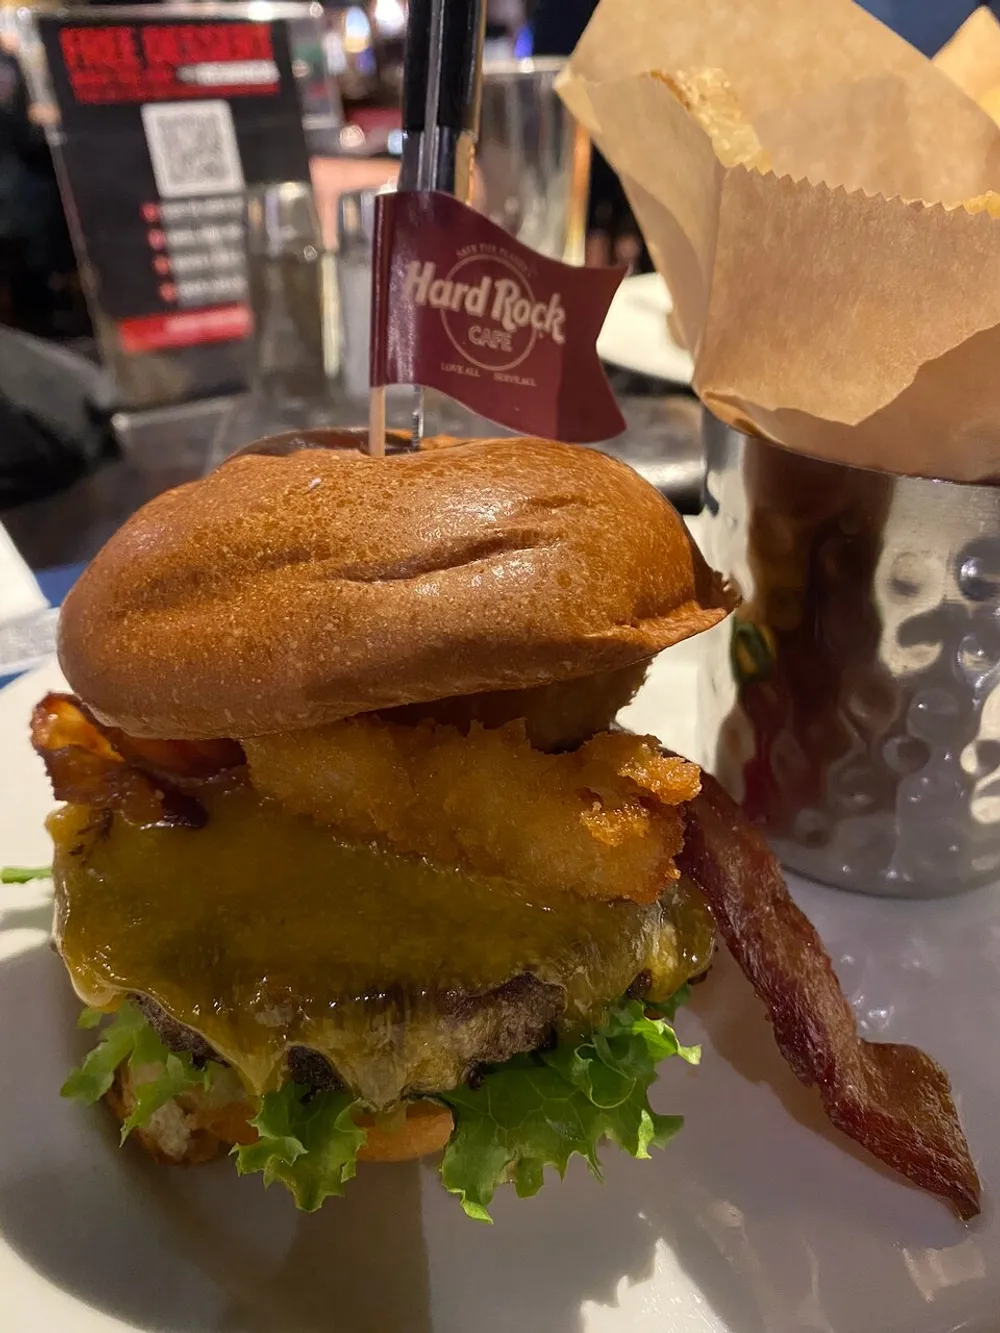 The image shows a gourmet burger with cheese bacon lettuce and a fried onion ring skewered with a branded toothpick from Hard Rock Caf served alongside a metal cup of French fries